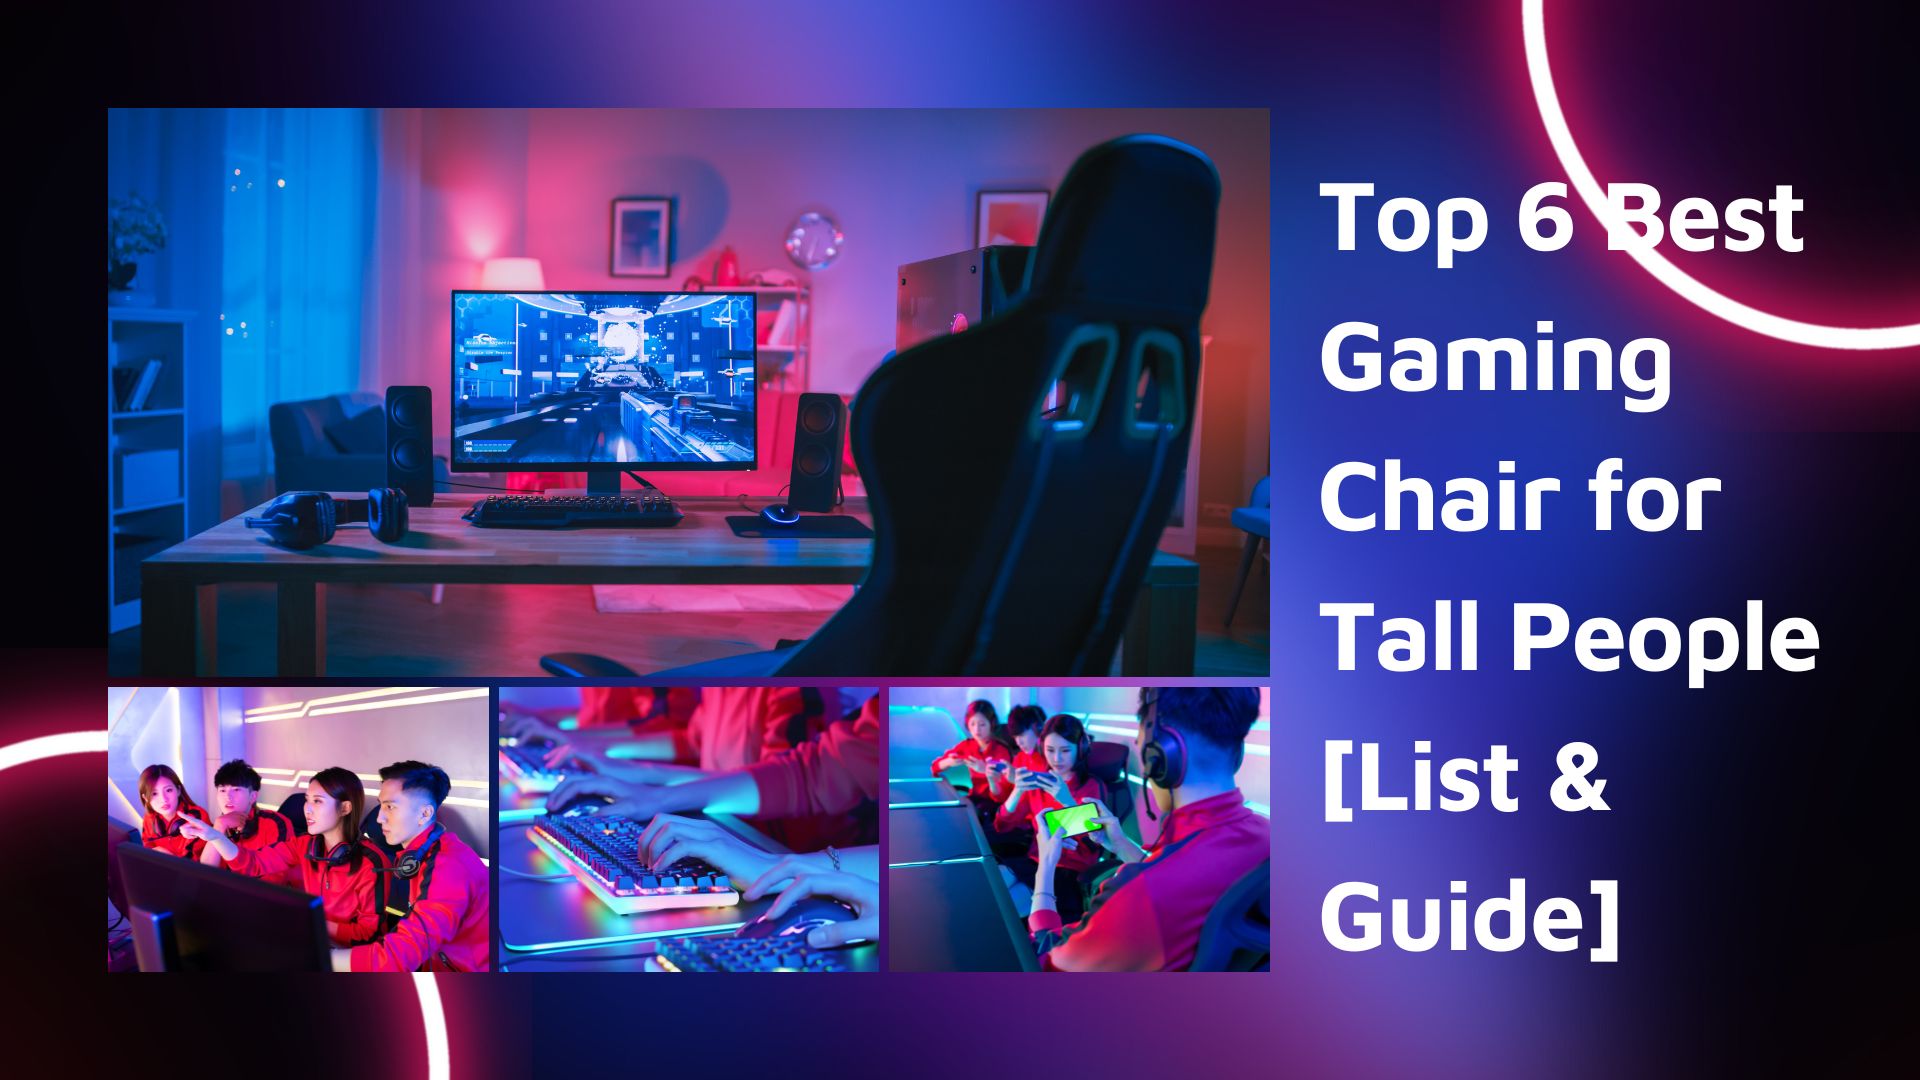 Top 6 Best Gaming Chair for Tall People [List & Guide]